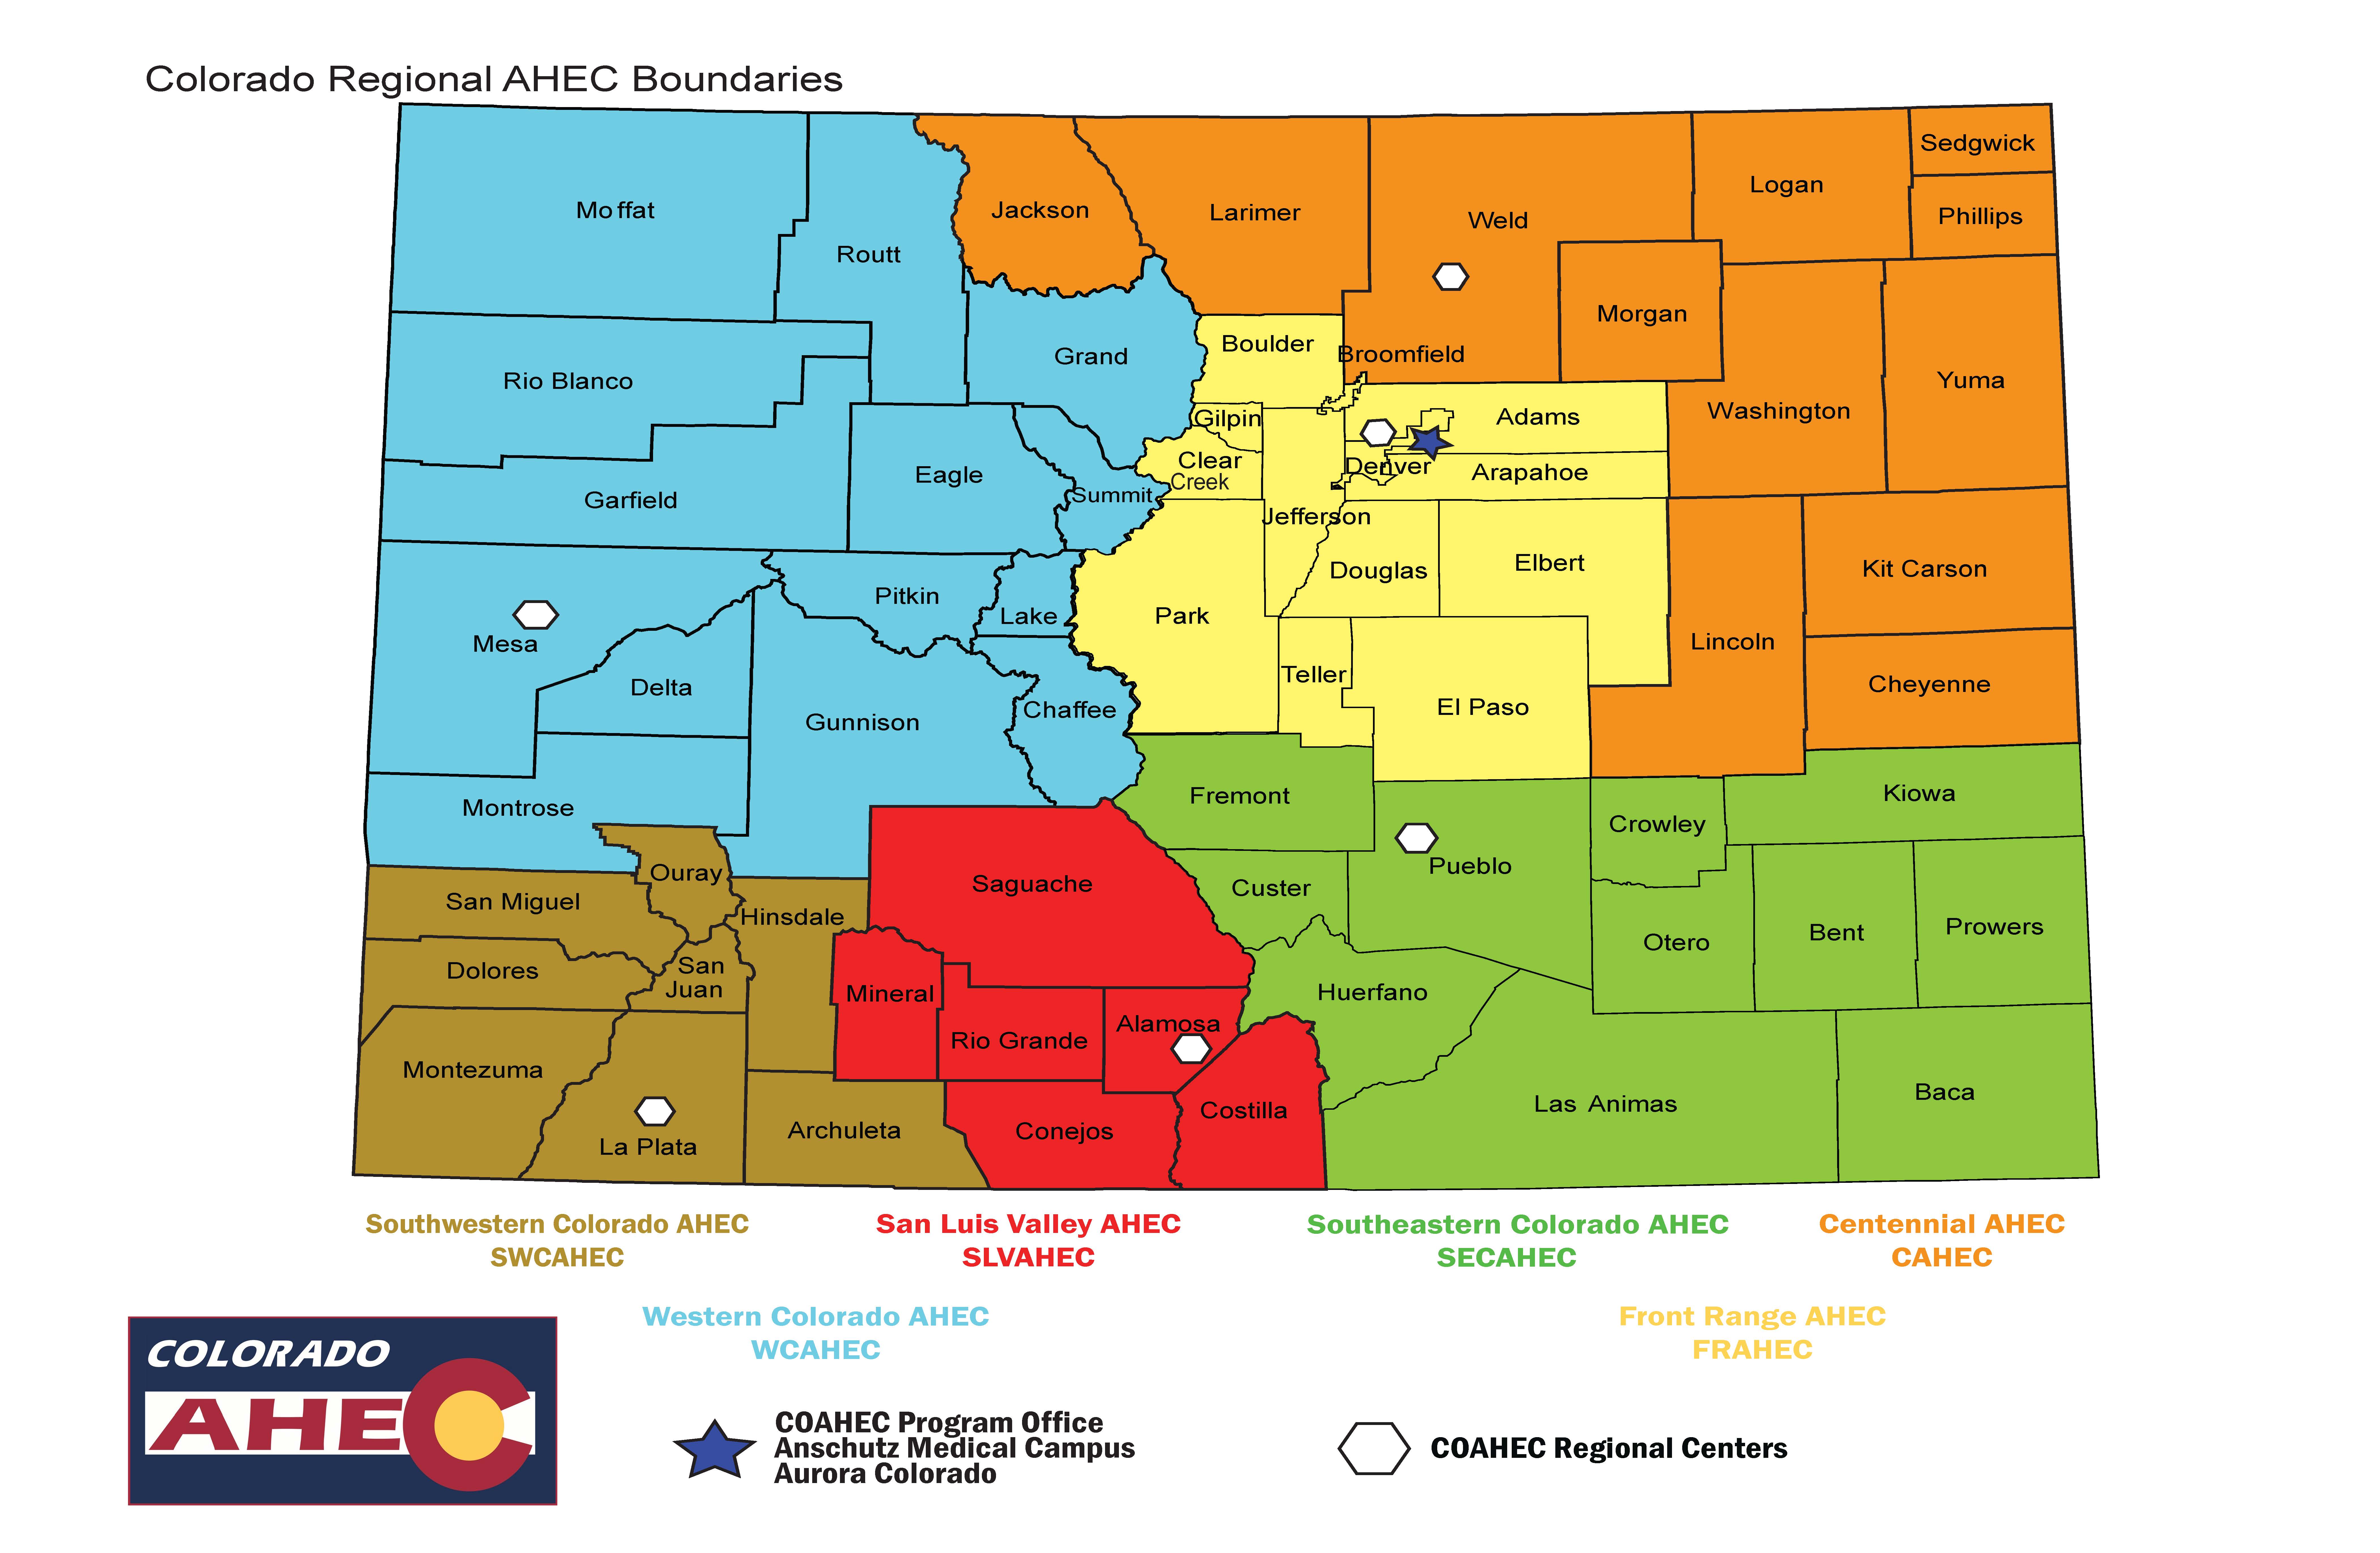 Color coded regional map of the six Colorado AHEC regions